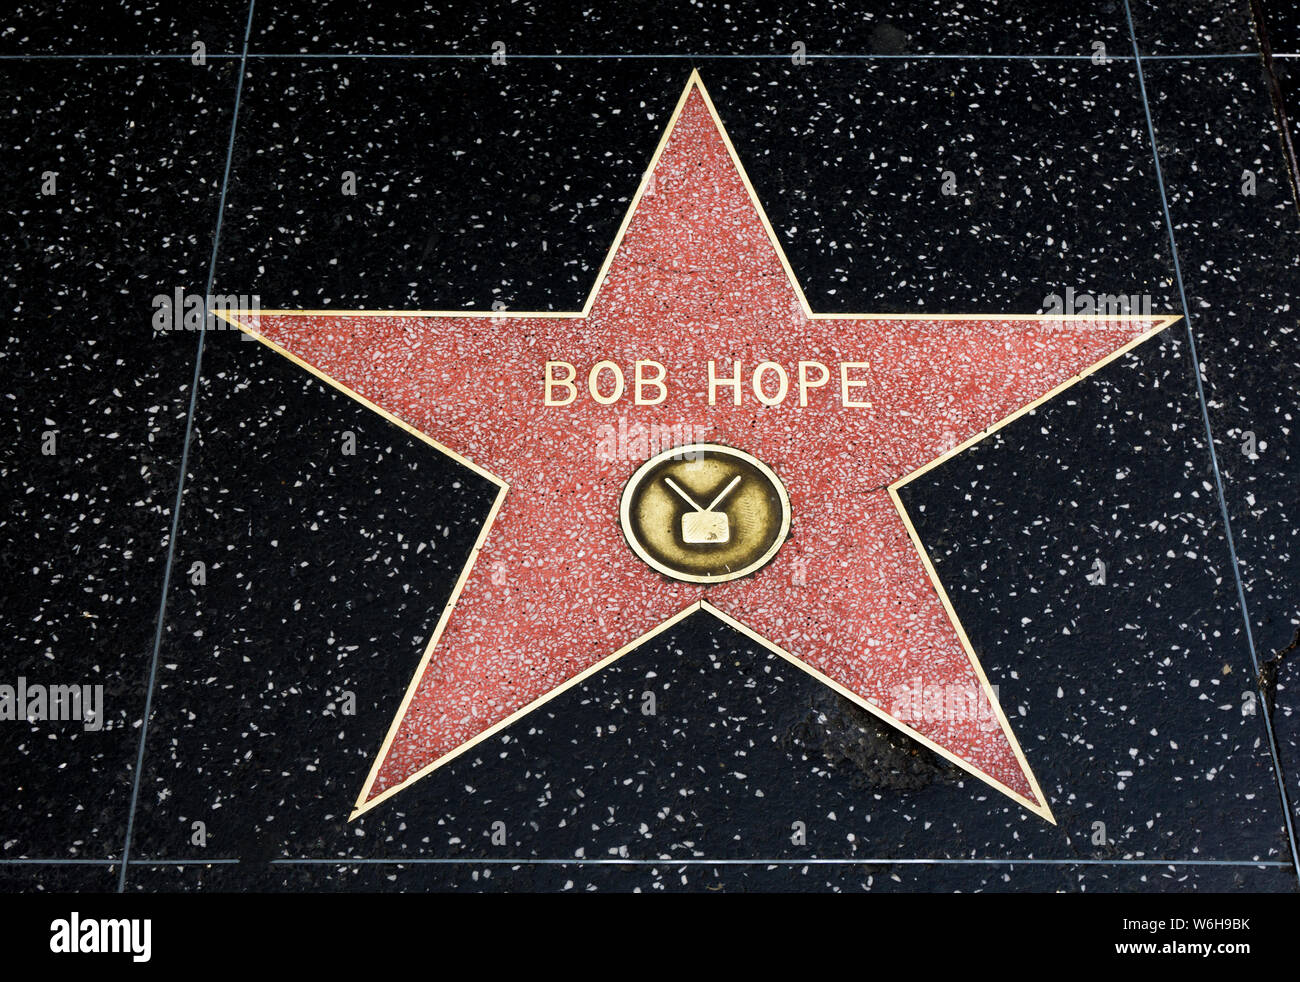 Celebrity Star on the Hollywood Walk of Fame Stock Photo